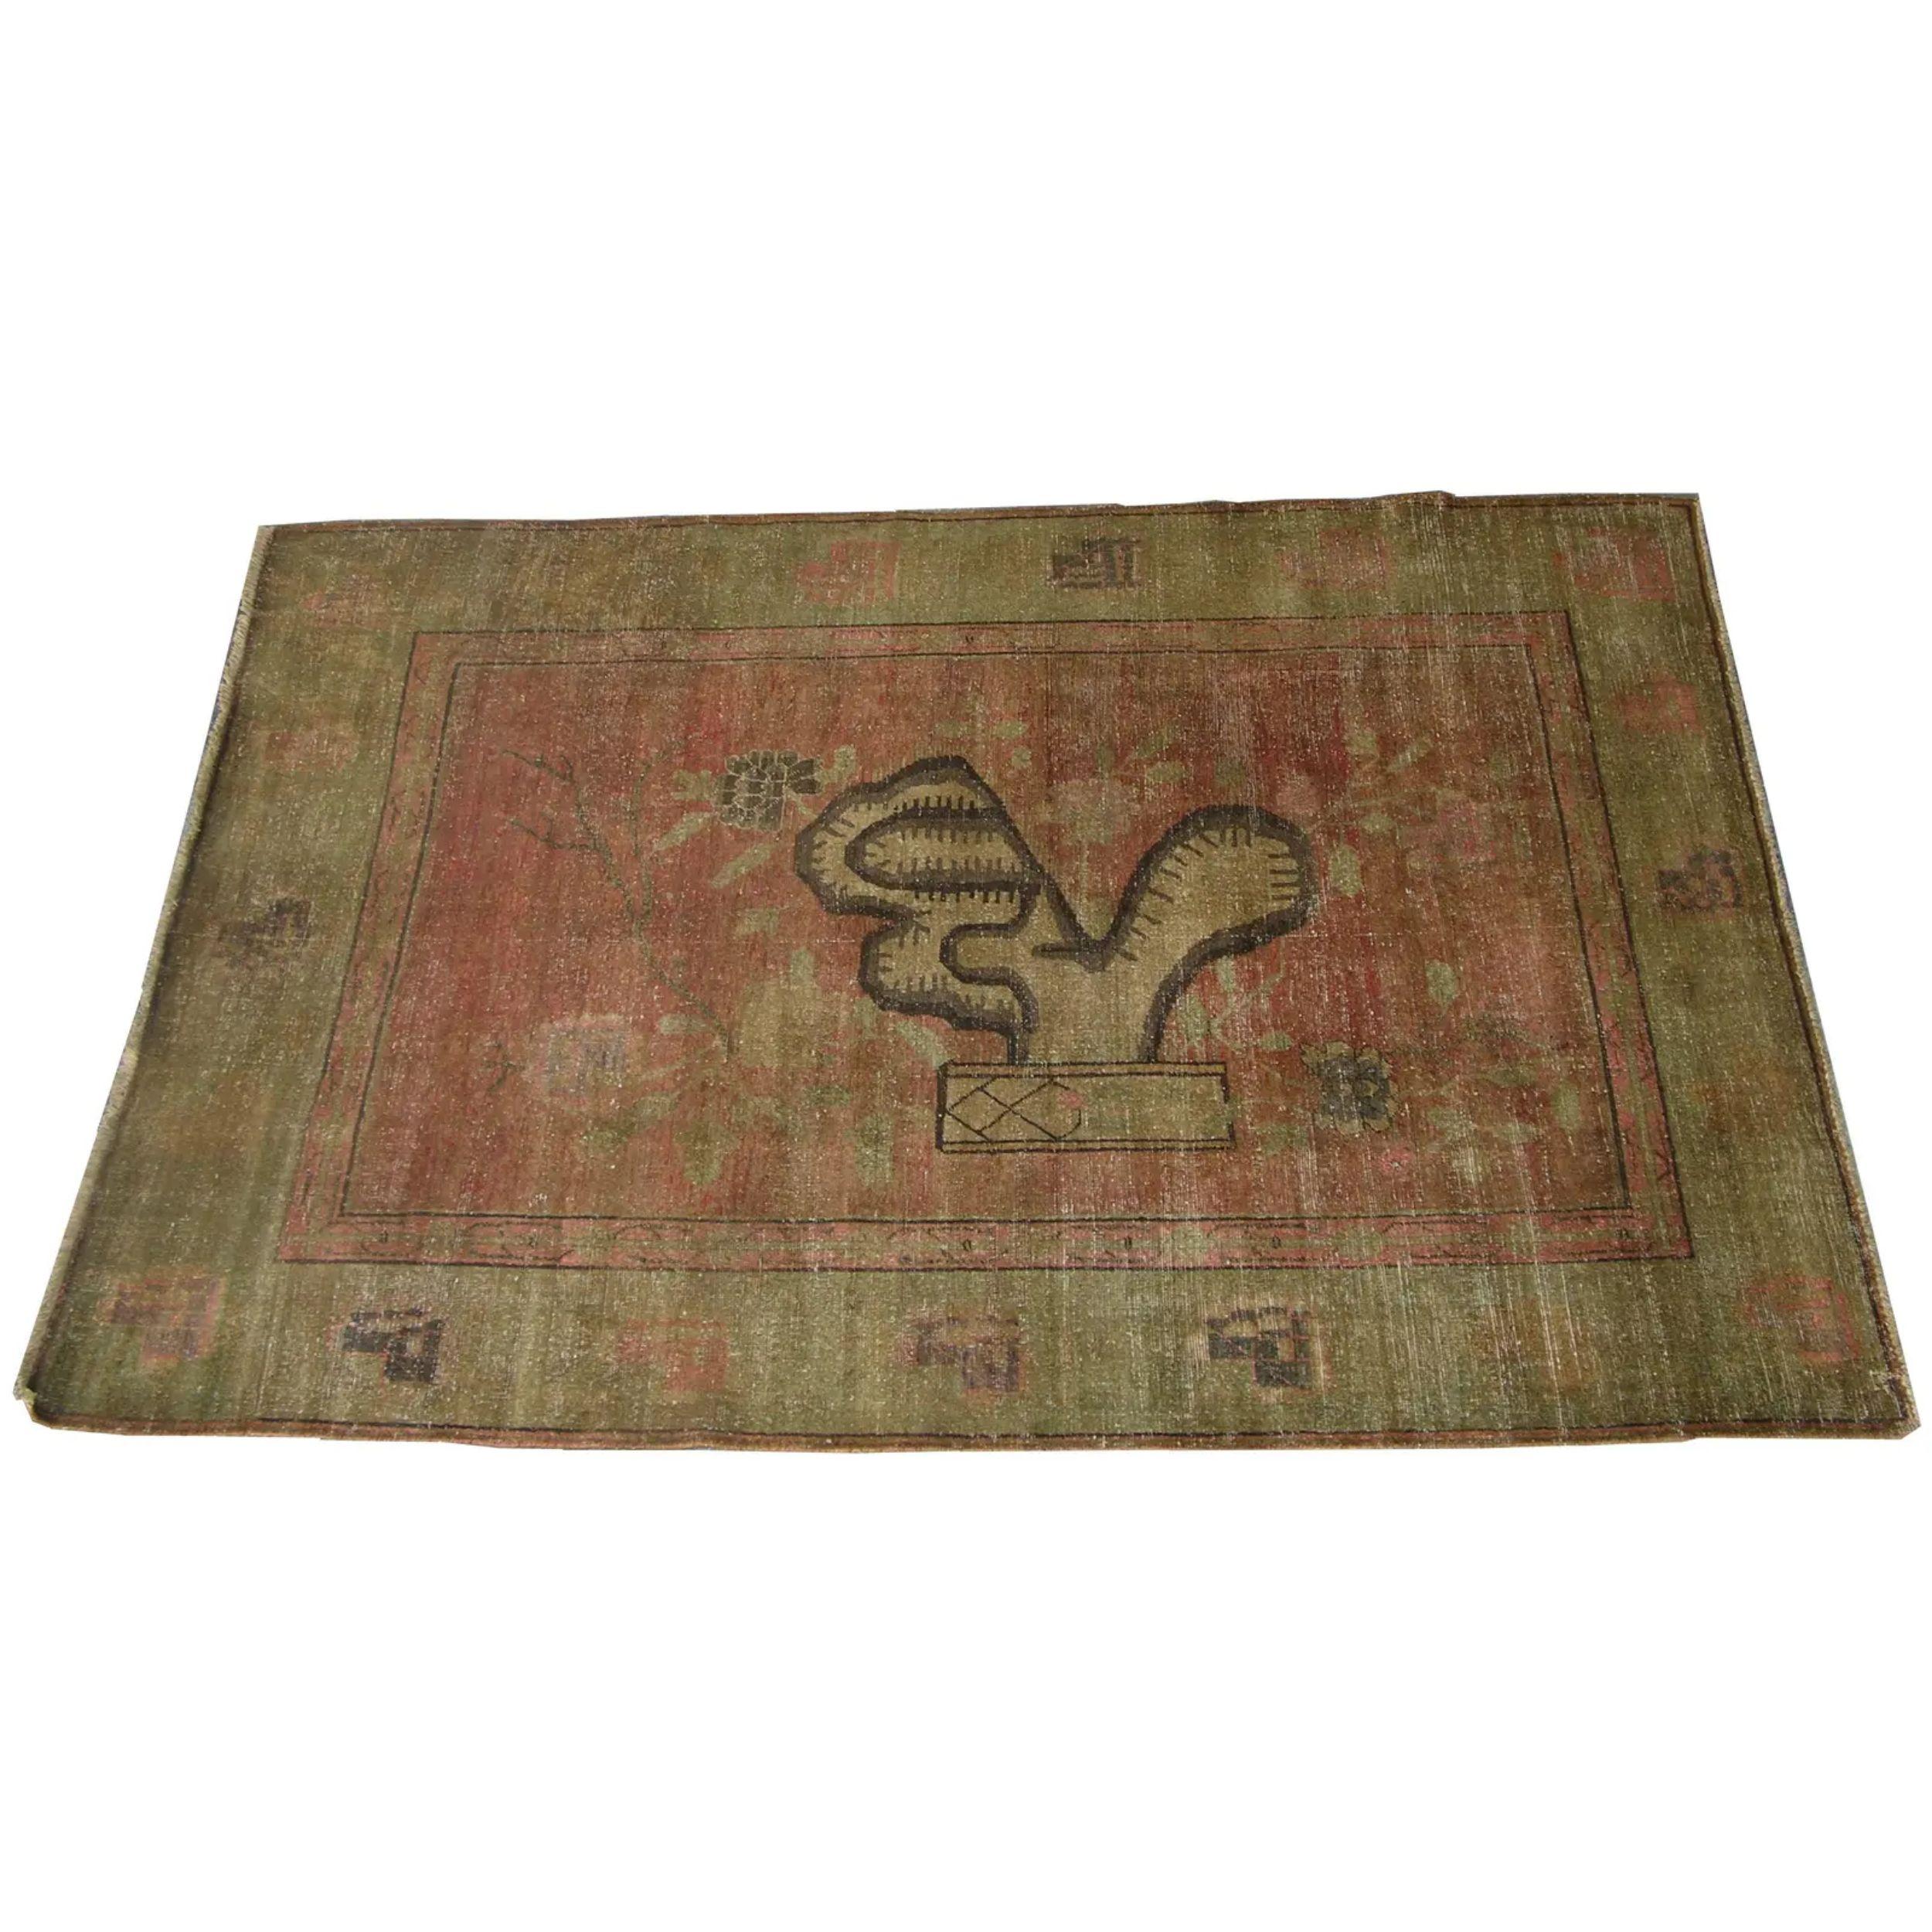 Early 20th Century 1900s Antique Khotan Samarkand Picasso Style Lion Rug 9'2'' X 6'1'' For Sale